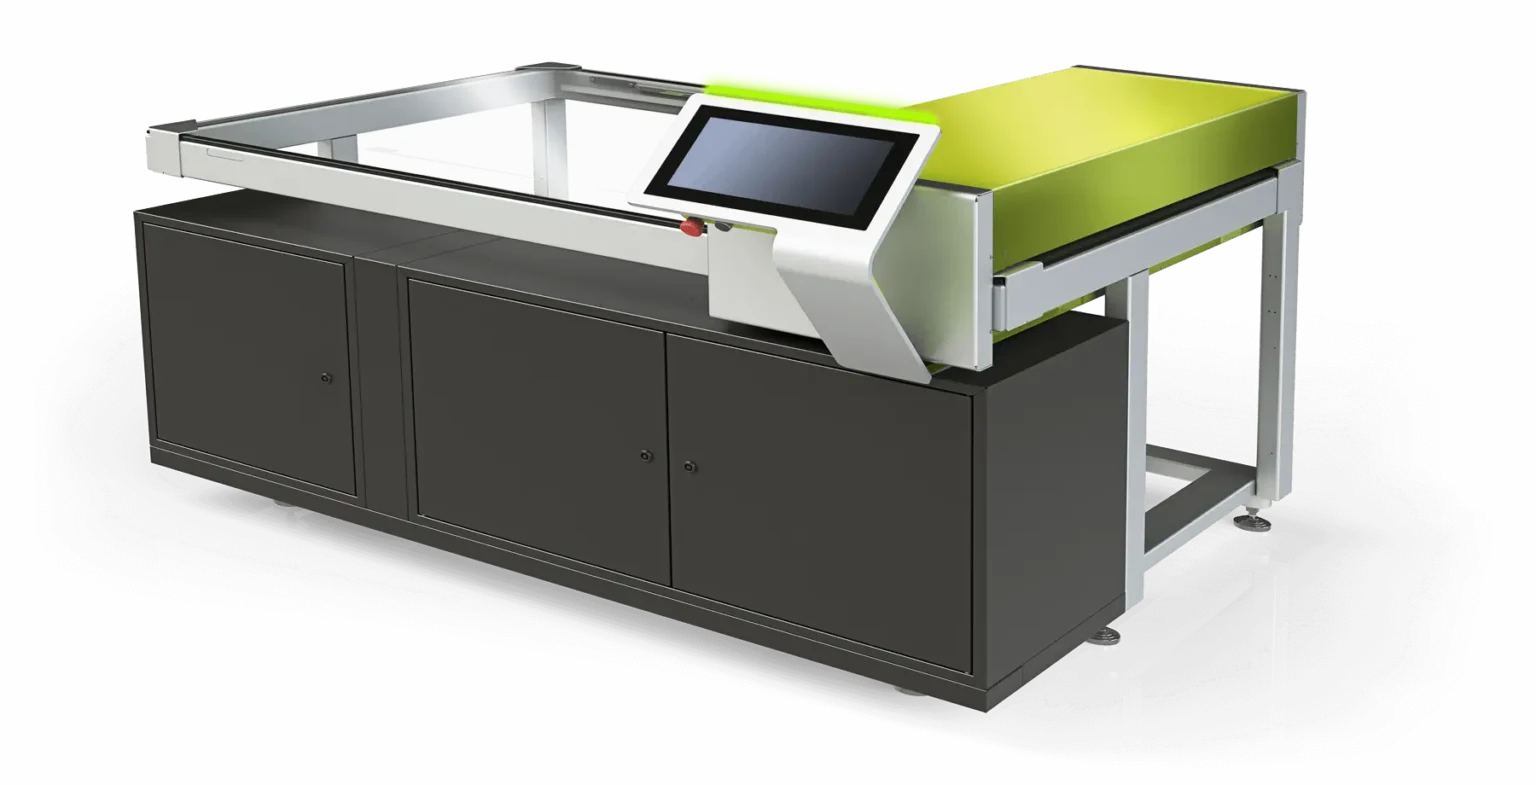 Large printer designed as a table